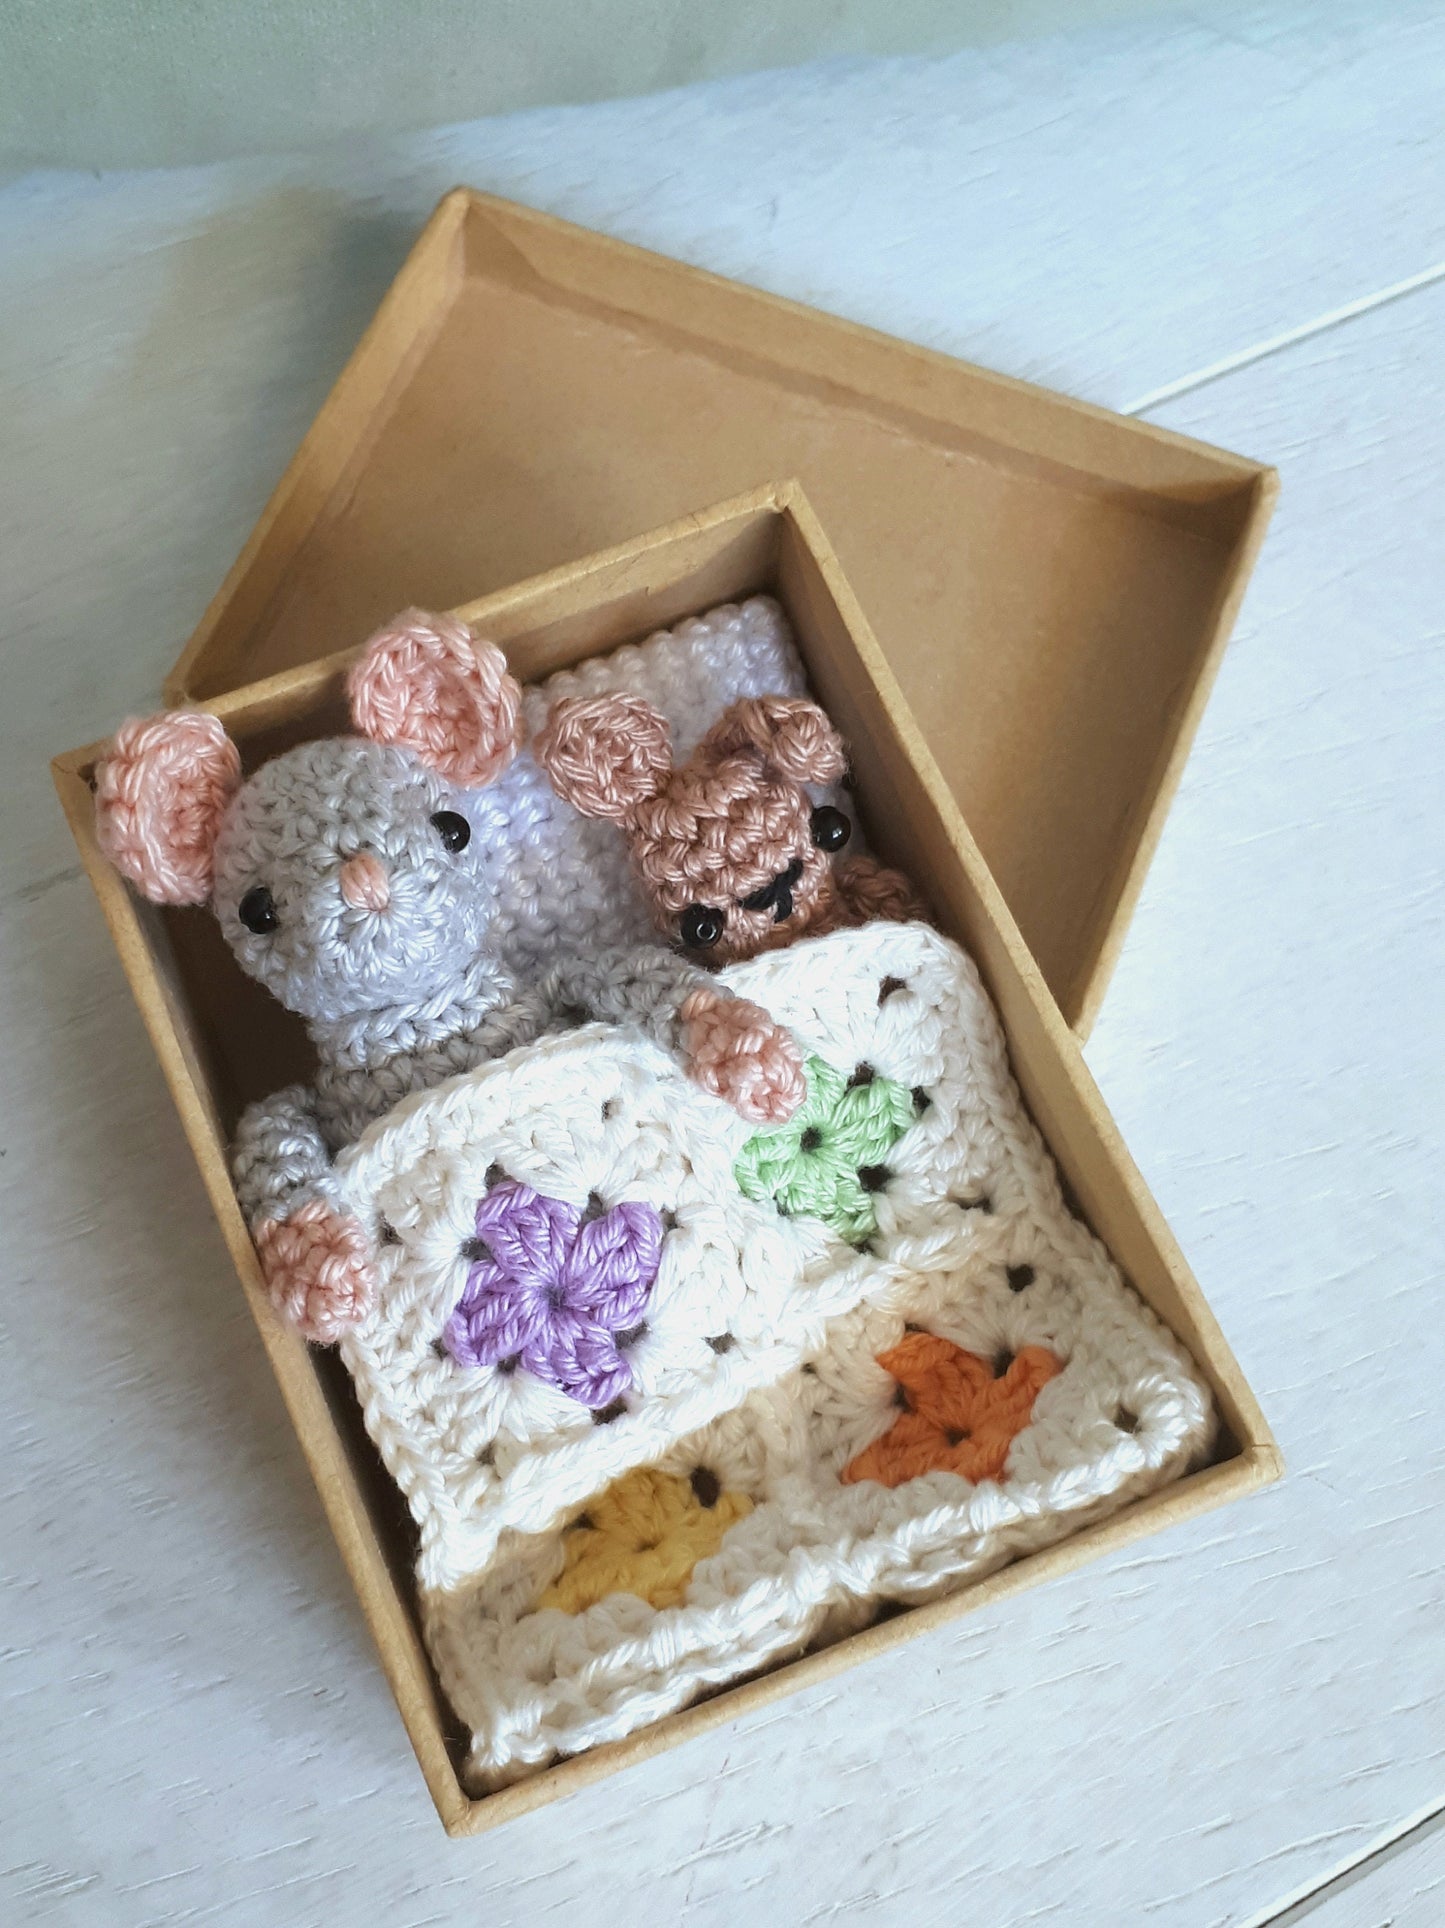 Mouse in a box travel toy crochet pattern